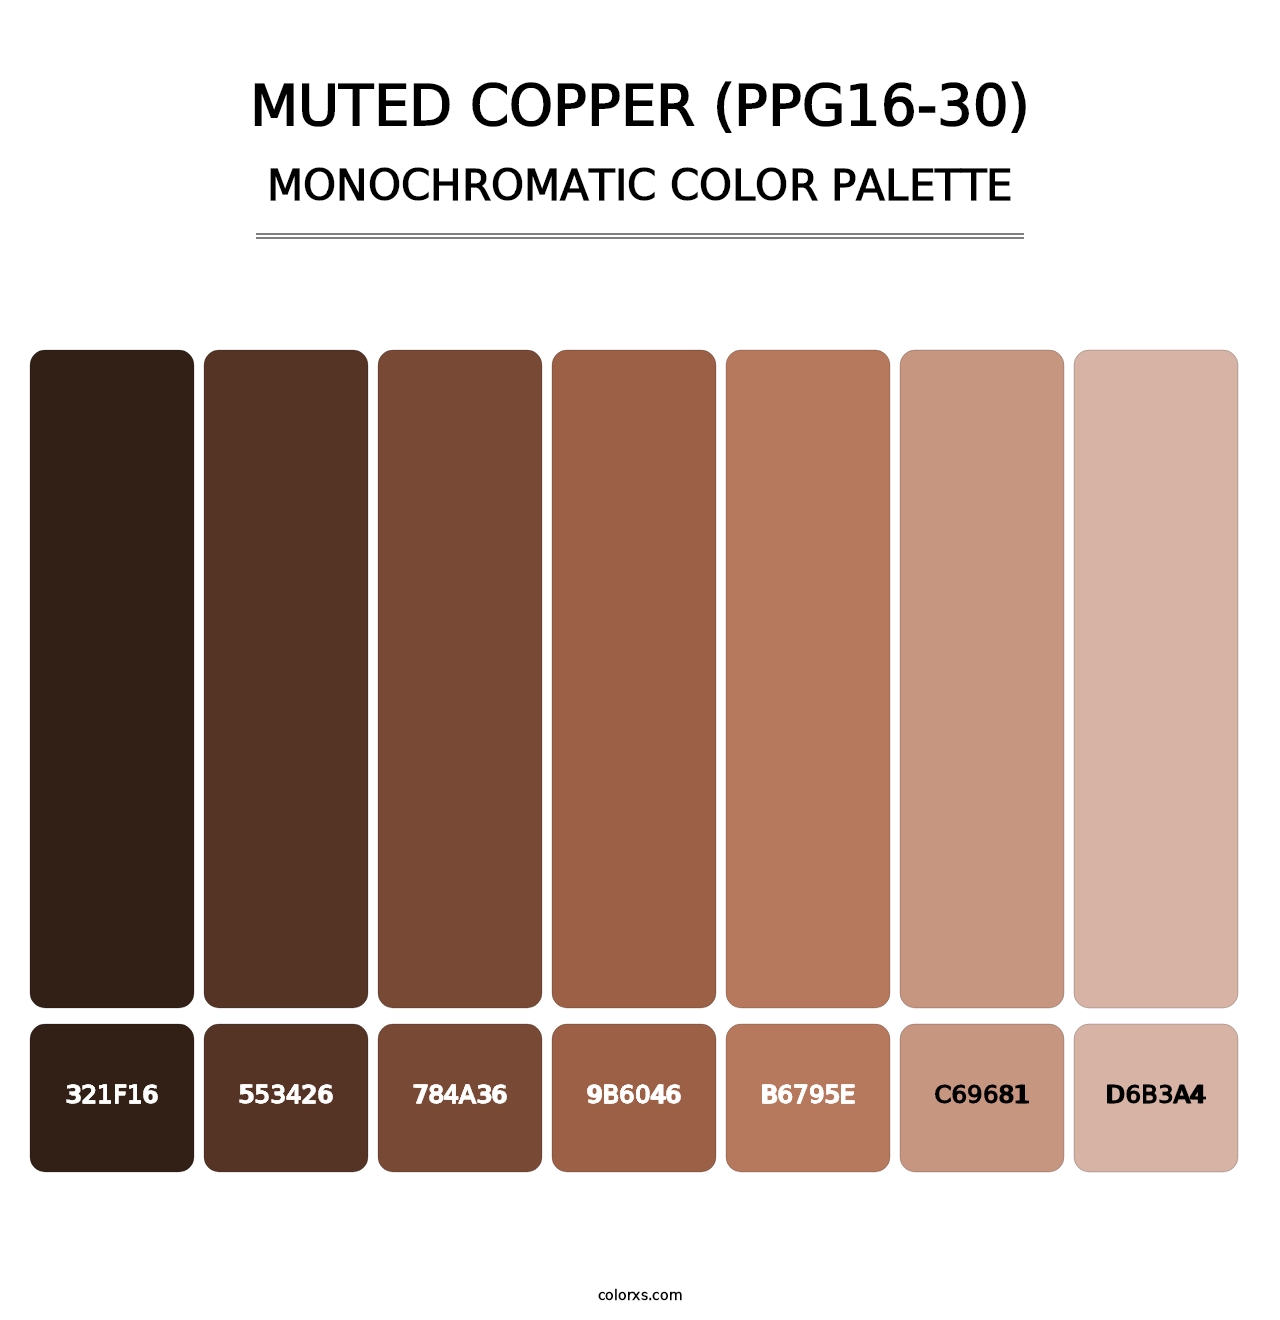 Muted Copper (PPG16-30) - Monochromatic Color Palette